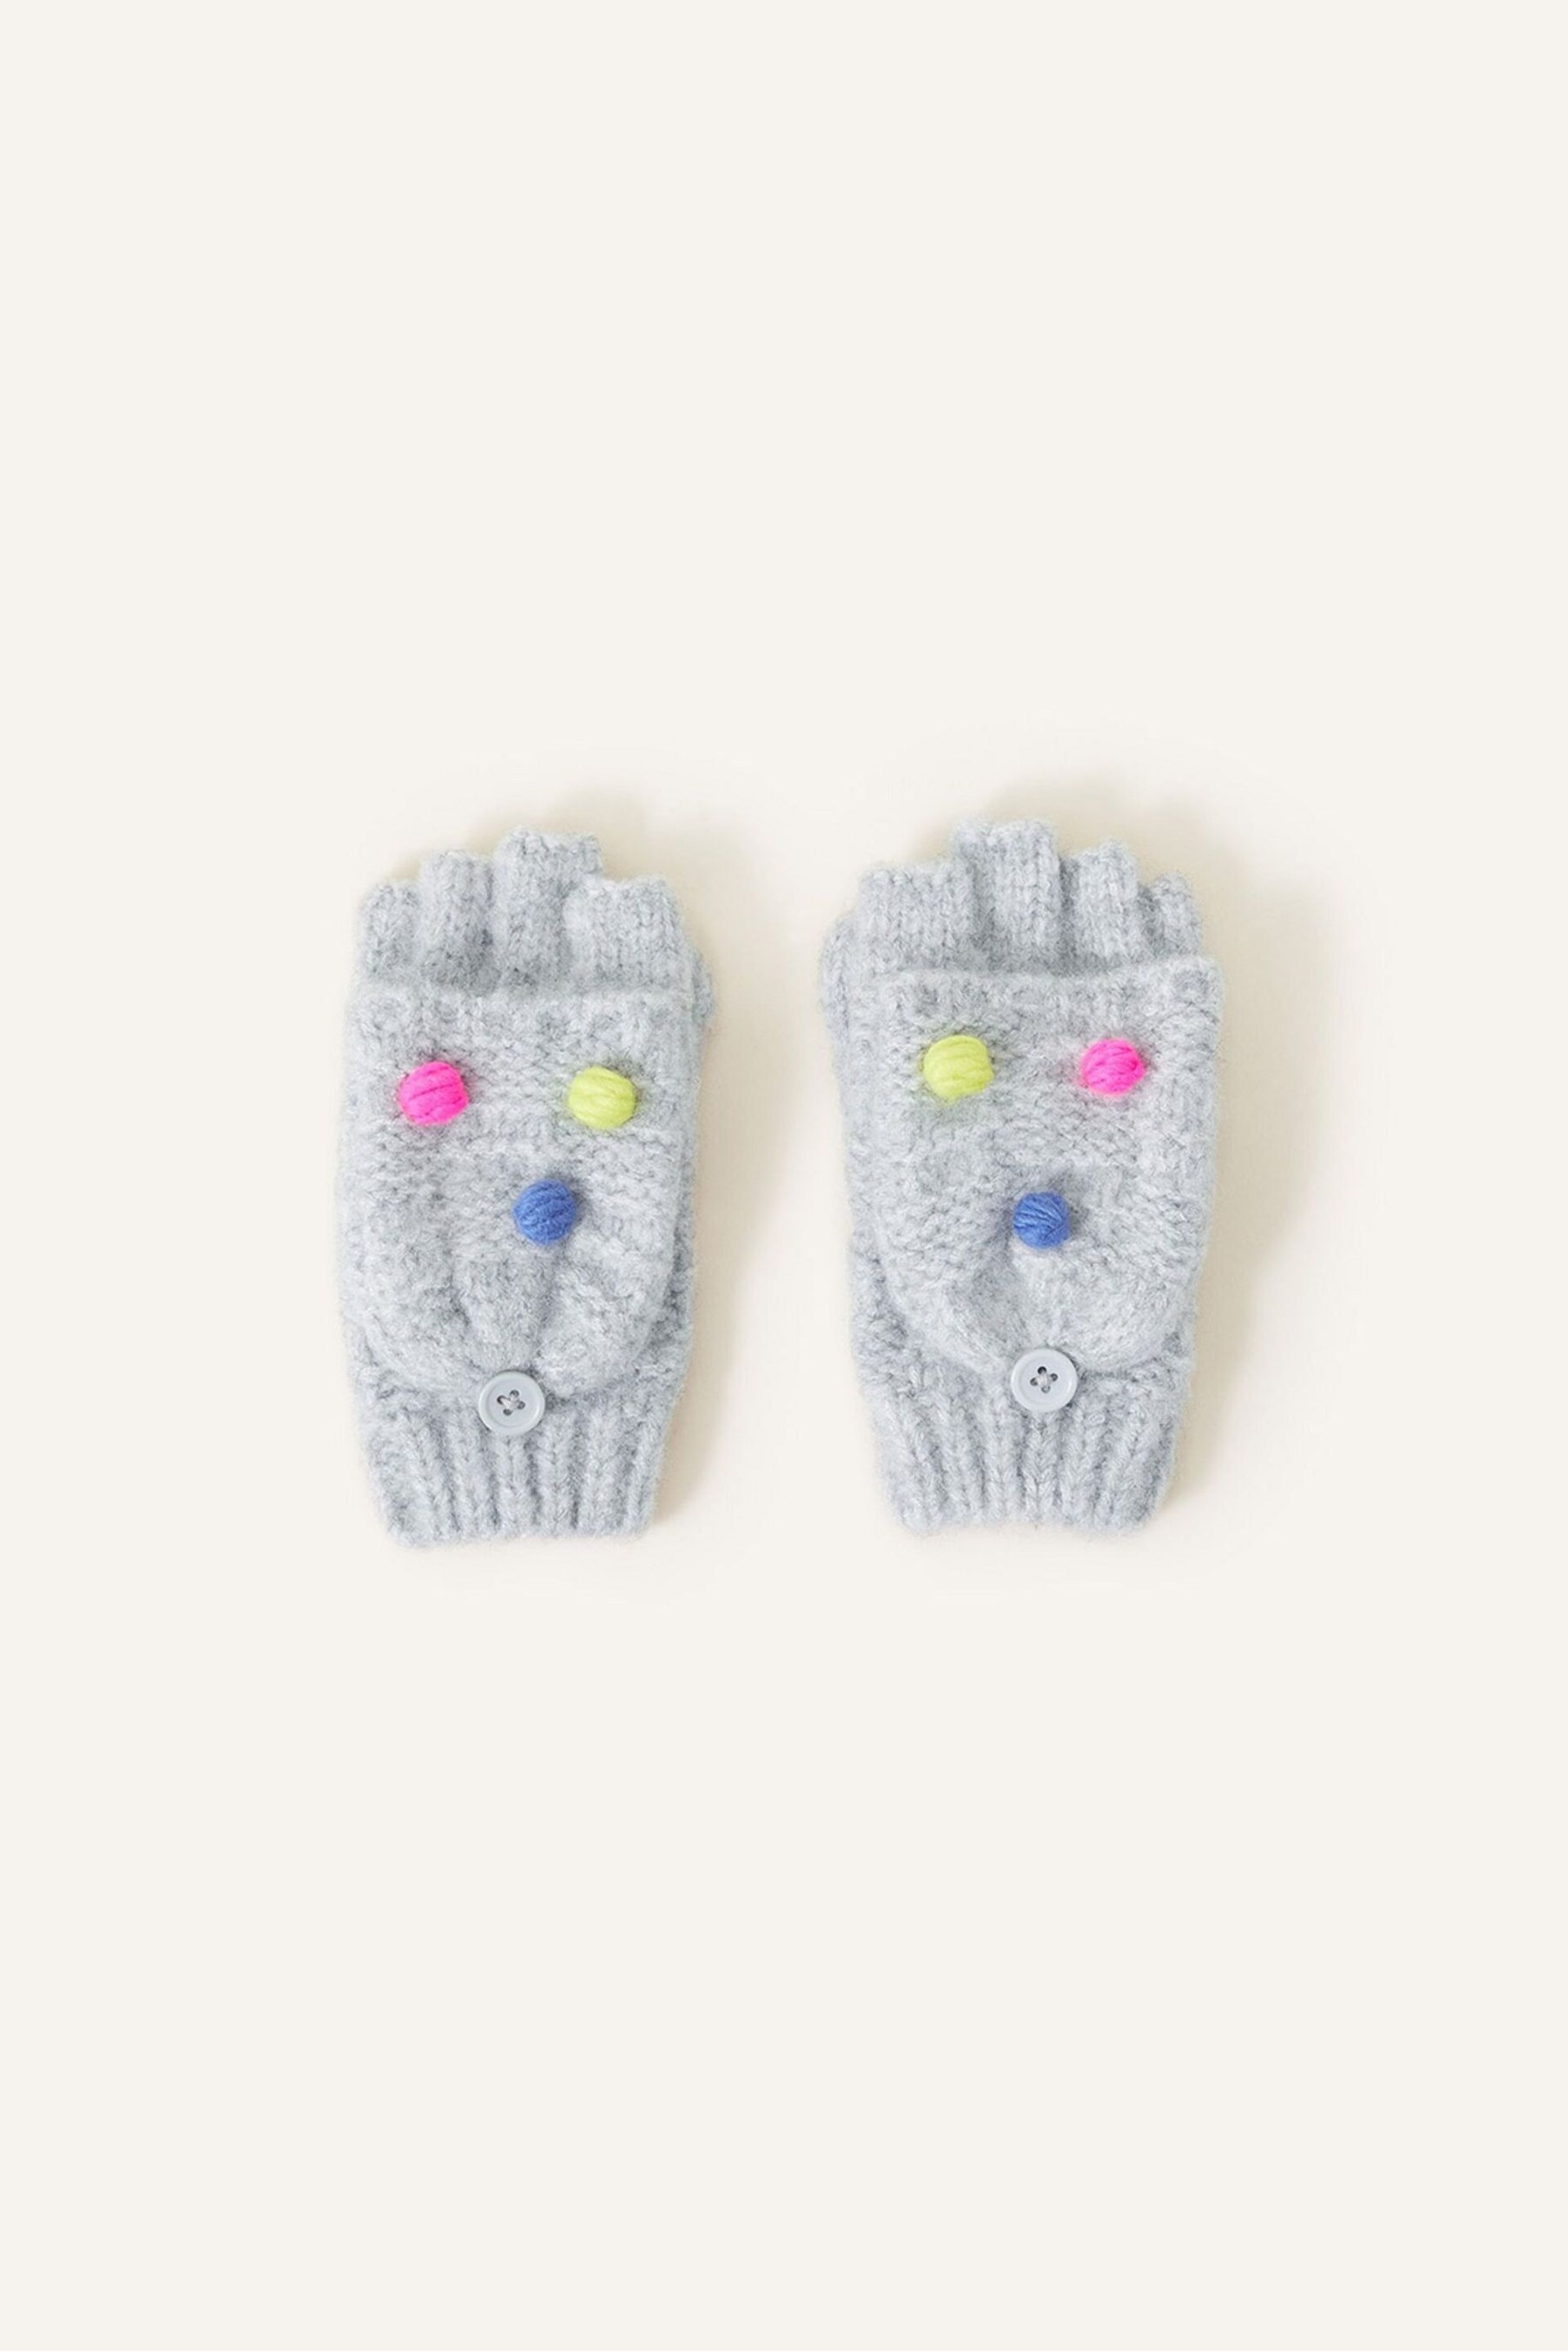 Angels By Accessorize Grey Pom Pom Capped Gloves - Image 1 of 2